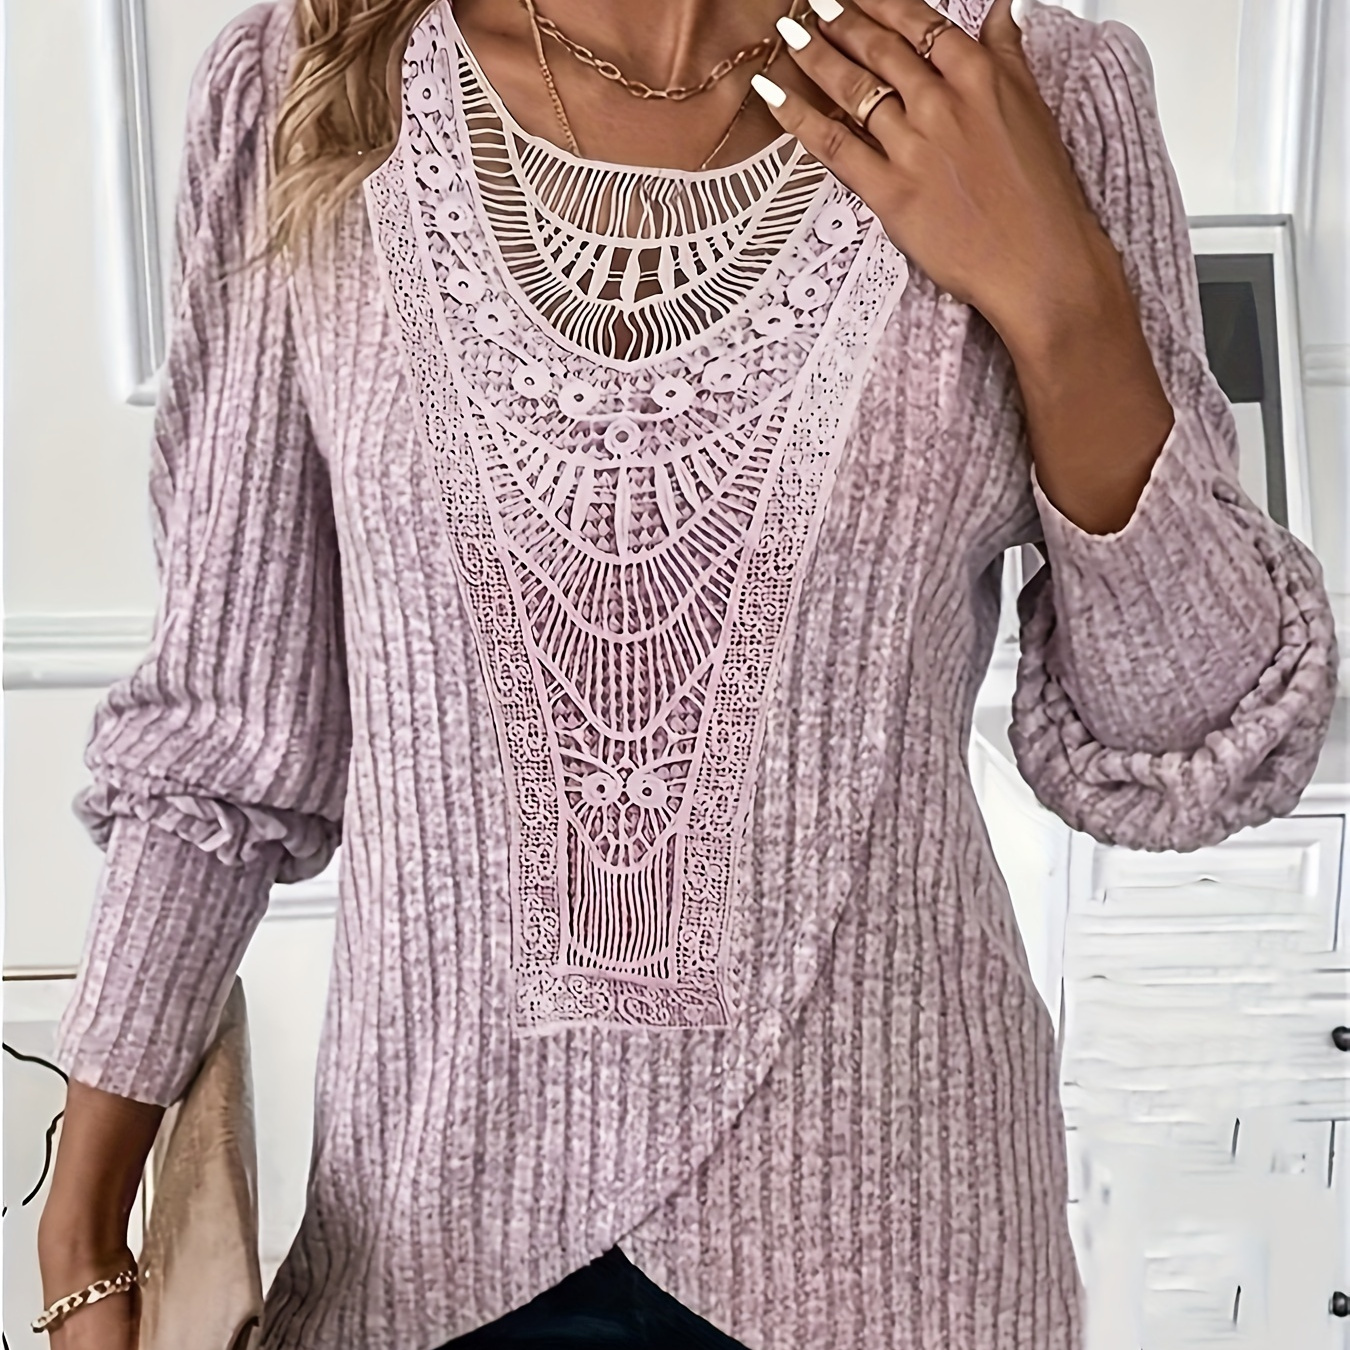 

Lace Splicing Crew Neck T-shirt, Versatile Long Sleeve Cross Front Top For Spring & Fall, Women's Clothing